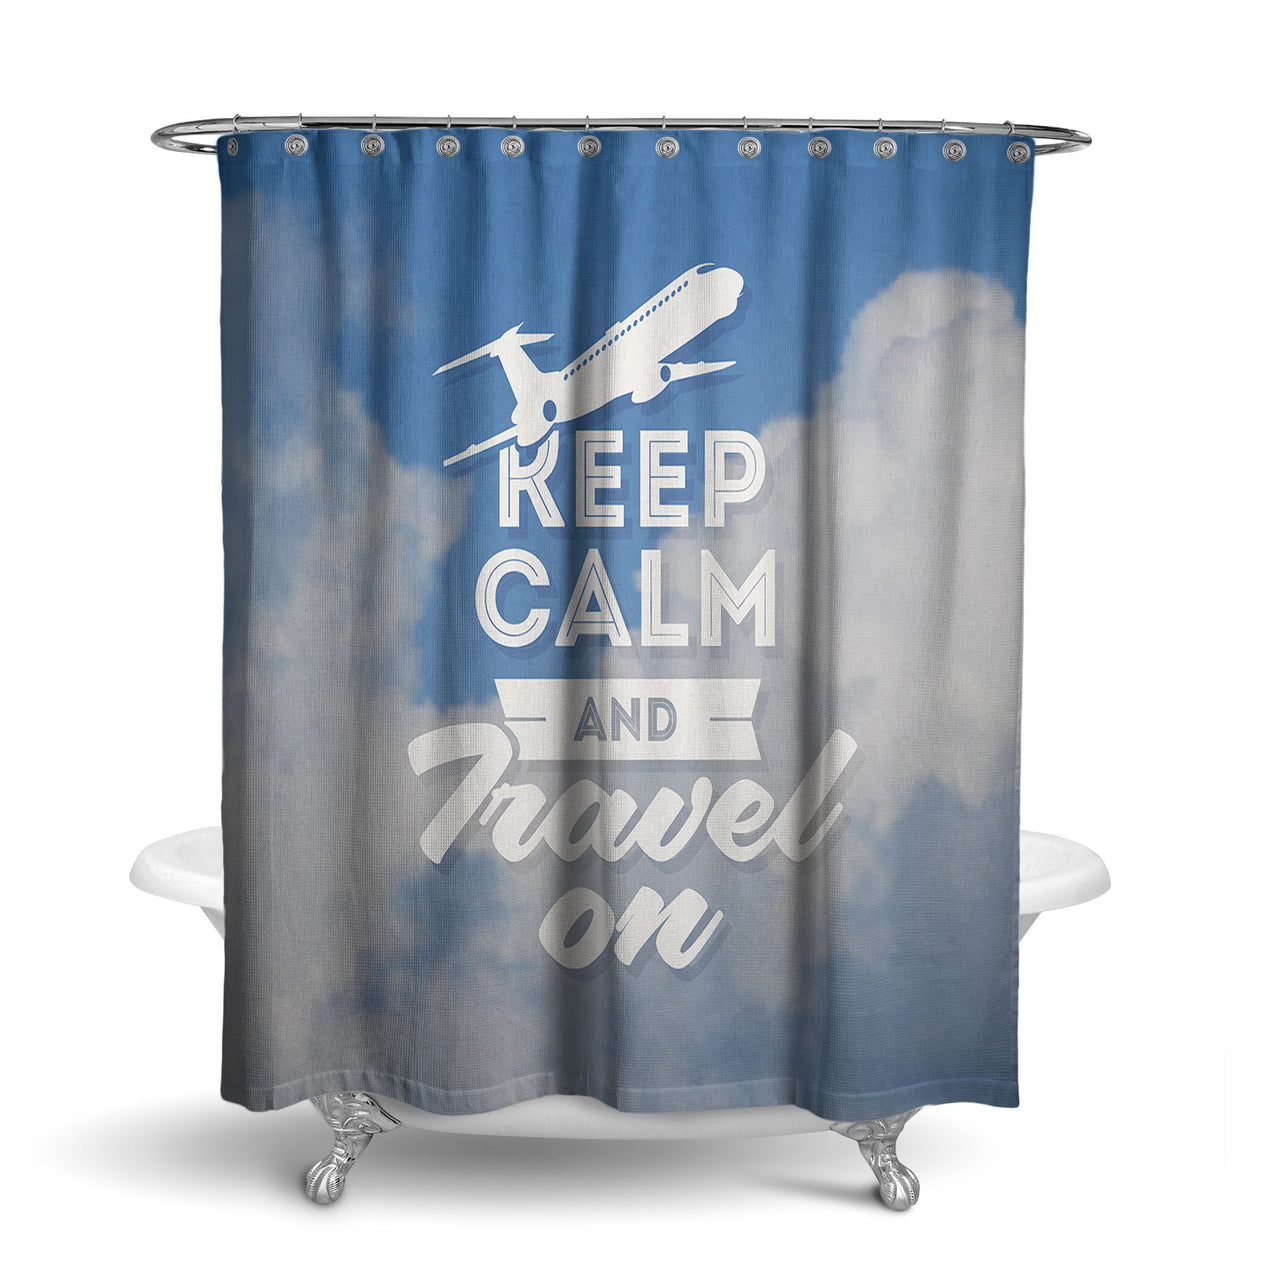 Keep Calm and Travel On Designed Shower Curtains